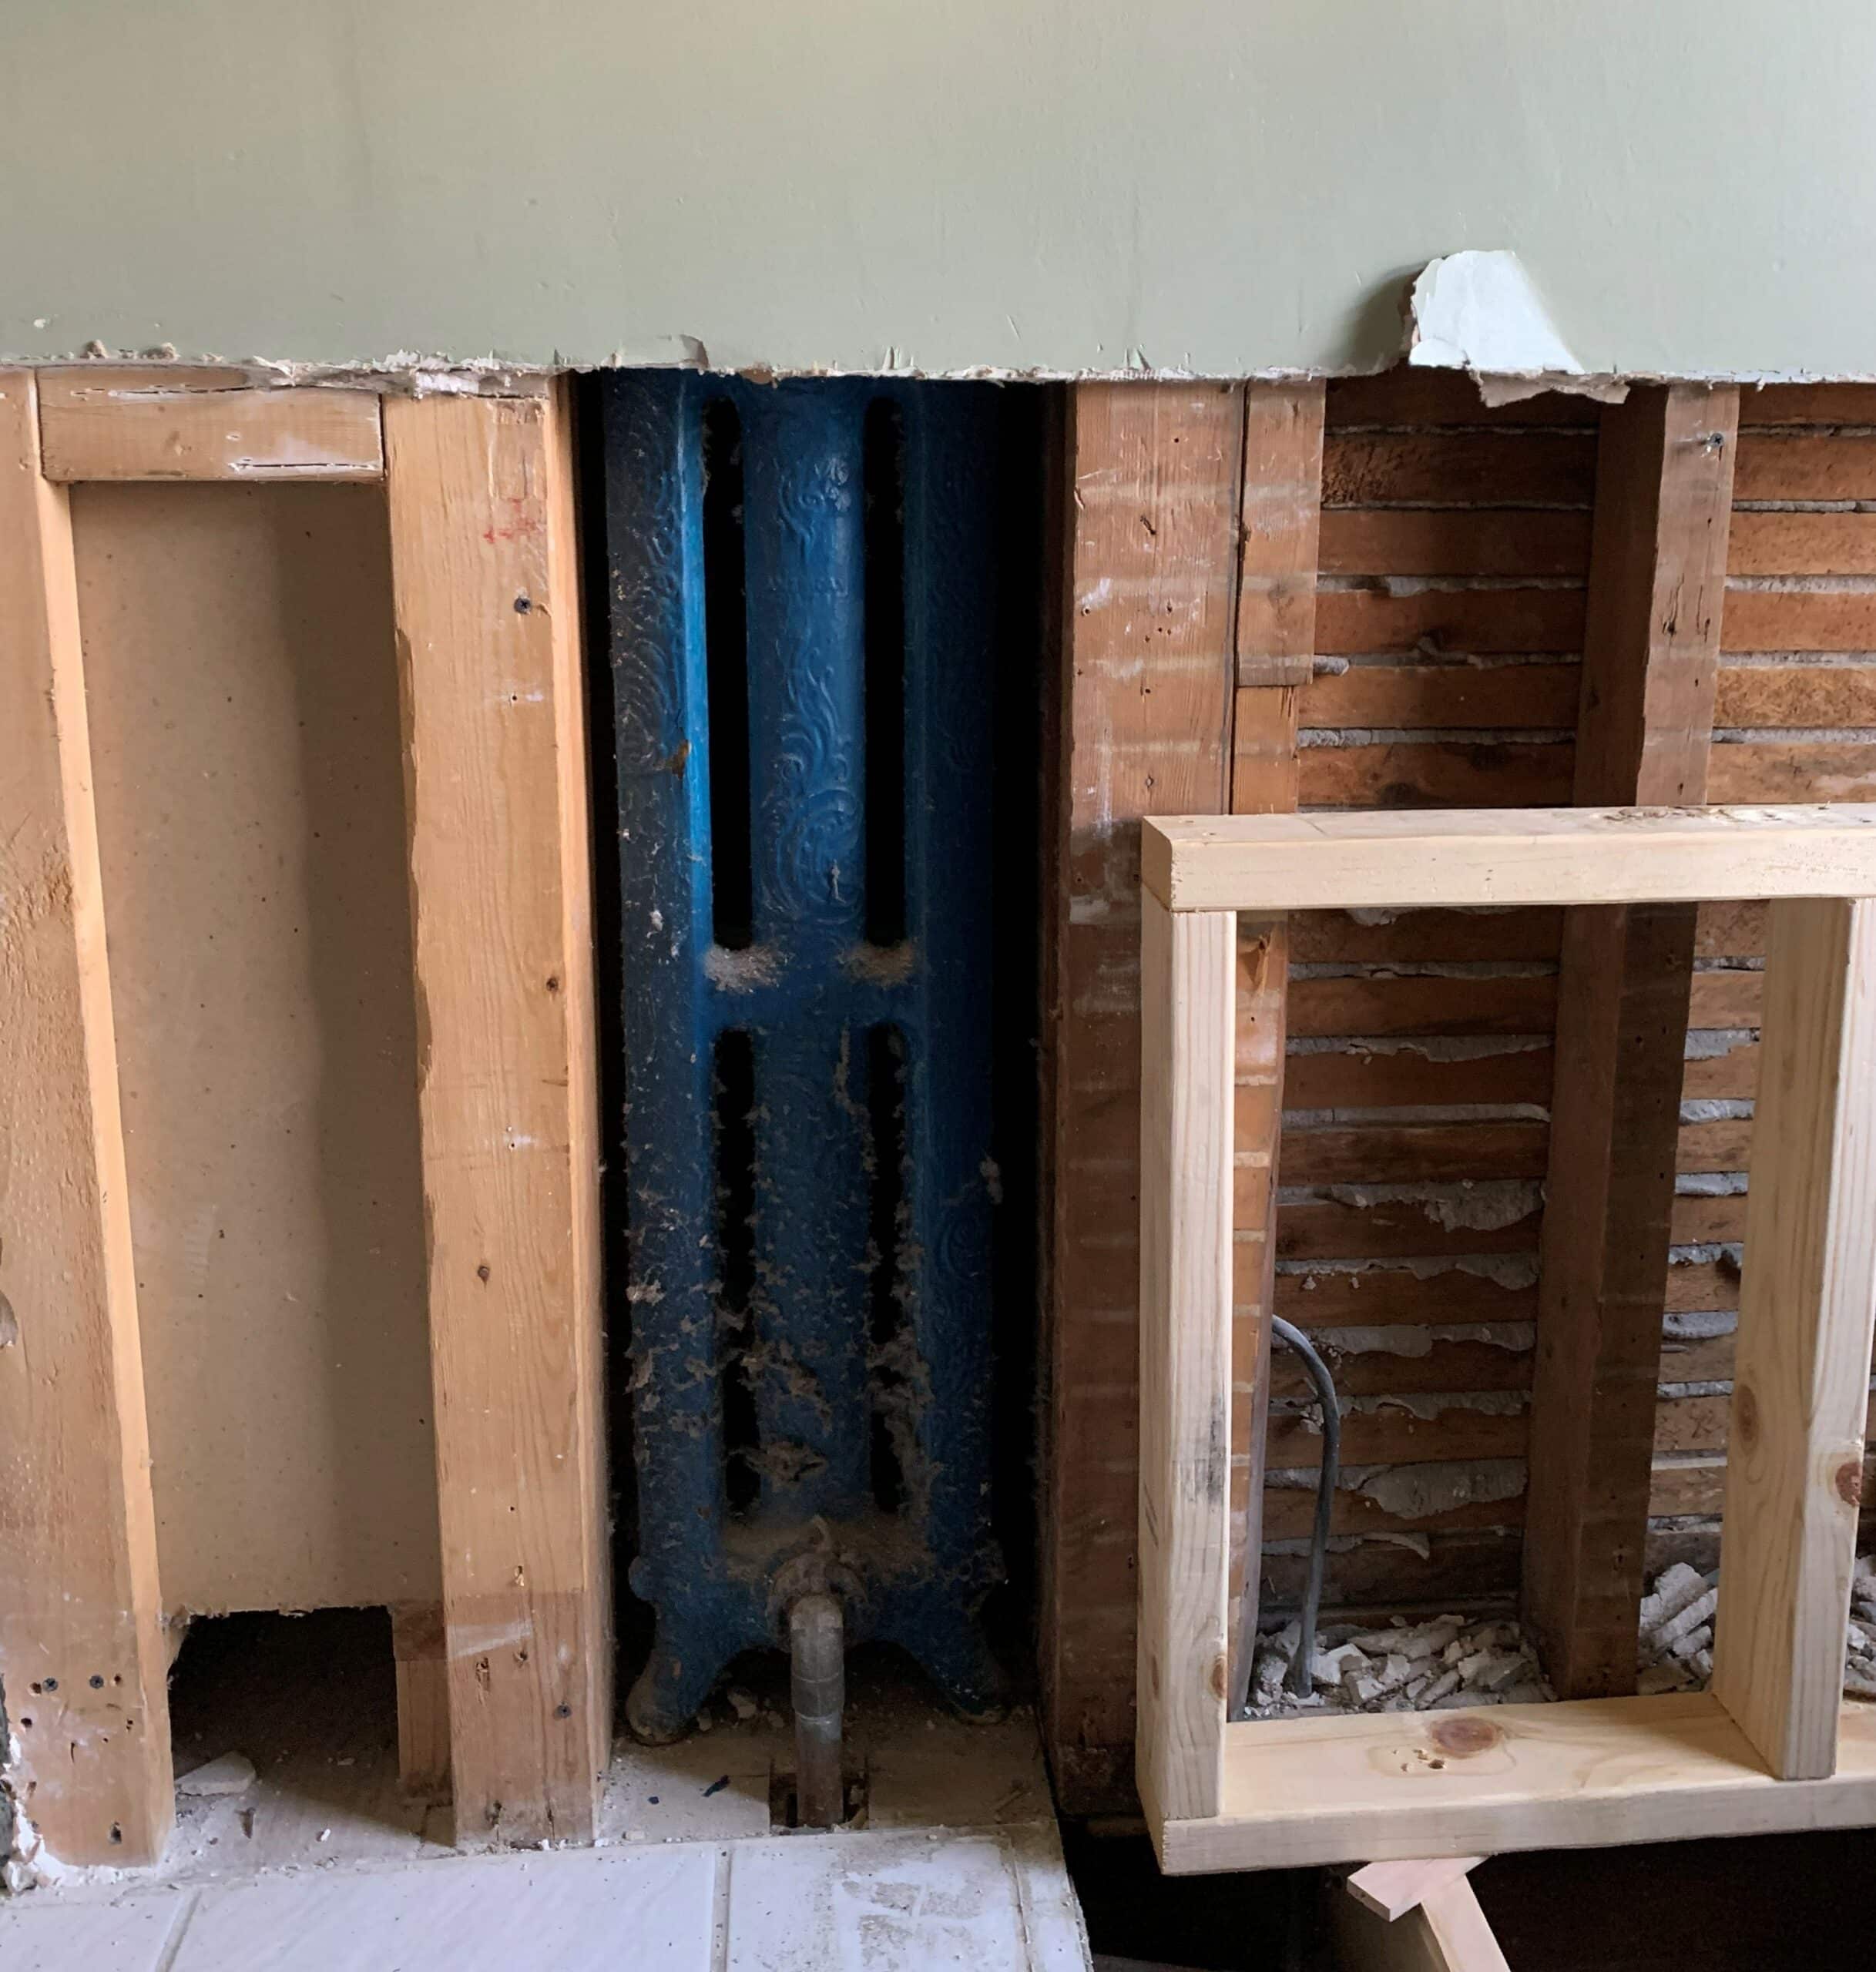 Blue radiator found in wall during bathroom renovation